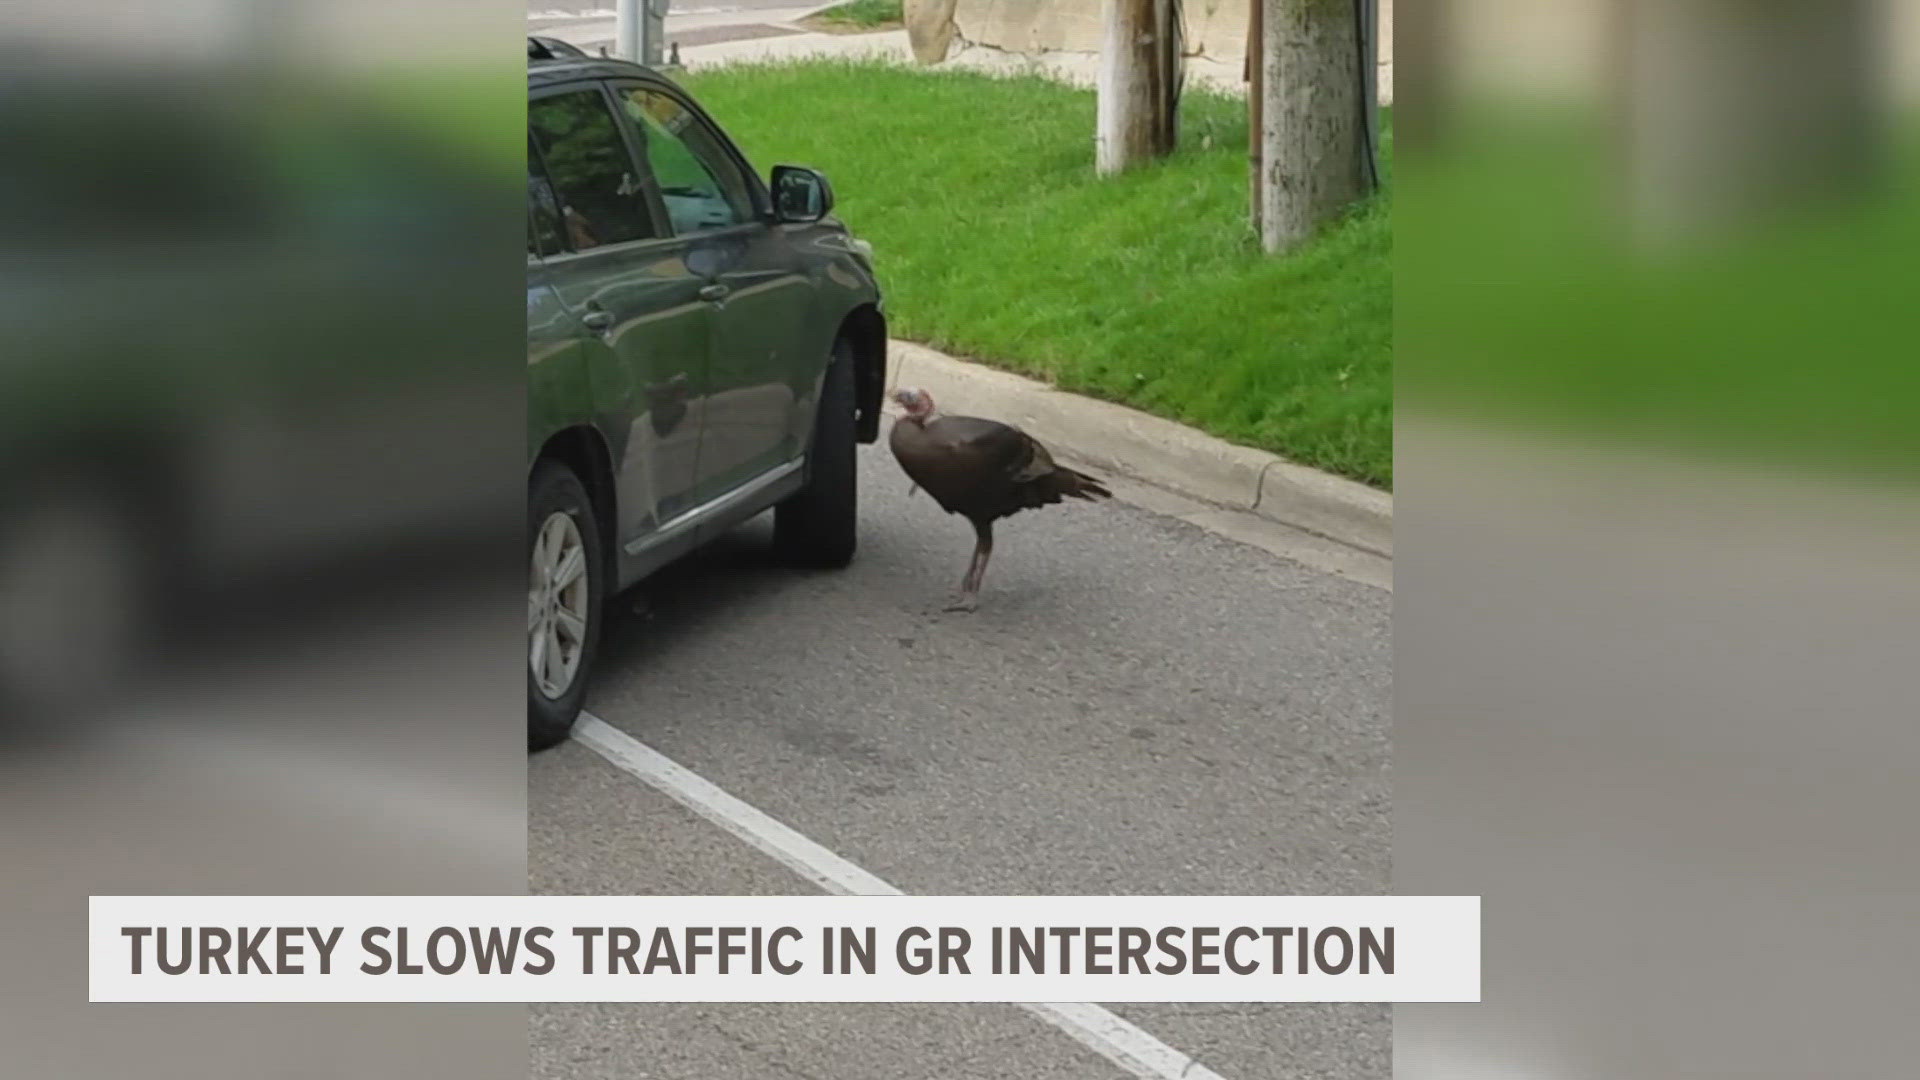 A Tours Around Michigan bus was making their way through Heritage Hill when they came across a turkey causing trouble.